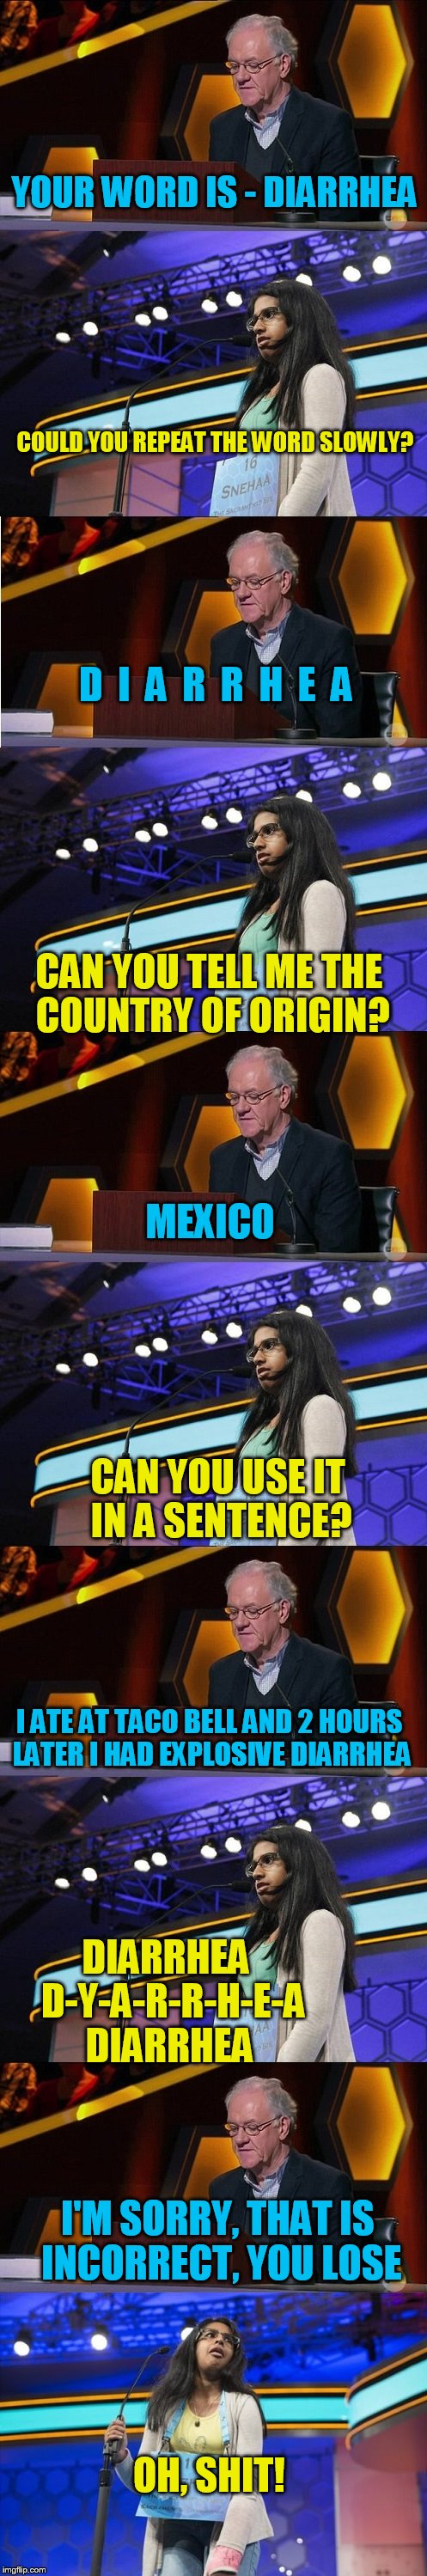 Spelling Bee runner up - just a little long meme! | YOUR WORD IS - DIARRHEA; COULD YOU REPEAT THE WORD SLOWLY? D  I  A  R  R  H  E  A; CAN YOU TELL ME THE COUNTRY OF ORIGIN? MEXICO; CAN YOU USE IT IN A SENTENCE? I ATE AT TACO BELL AND 2 HOURS LATER I HAD EXPLOSIVE DIARRHEA; DIARRHEA  D-Y-A-R-R-H-E-A DIARRHEA; I'M SORRY, THAT IS INCORRECT, YOU LOSE; OH, SHIT! | image tagged in tammyfaye | made w/ Imgflip meme maker